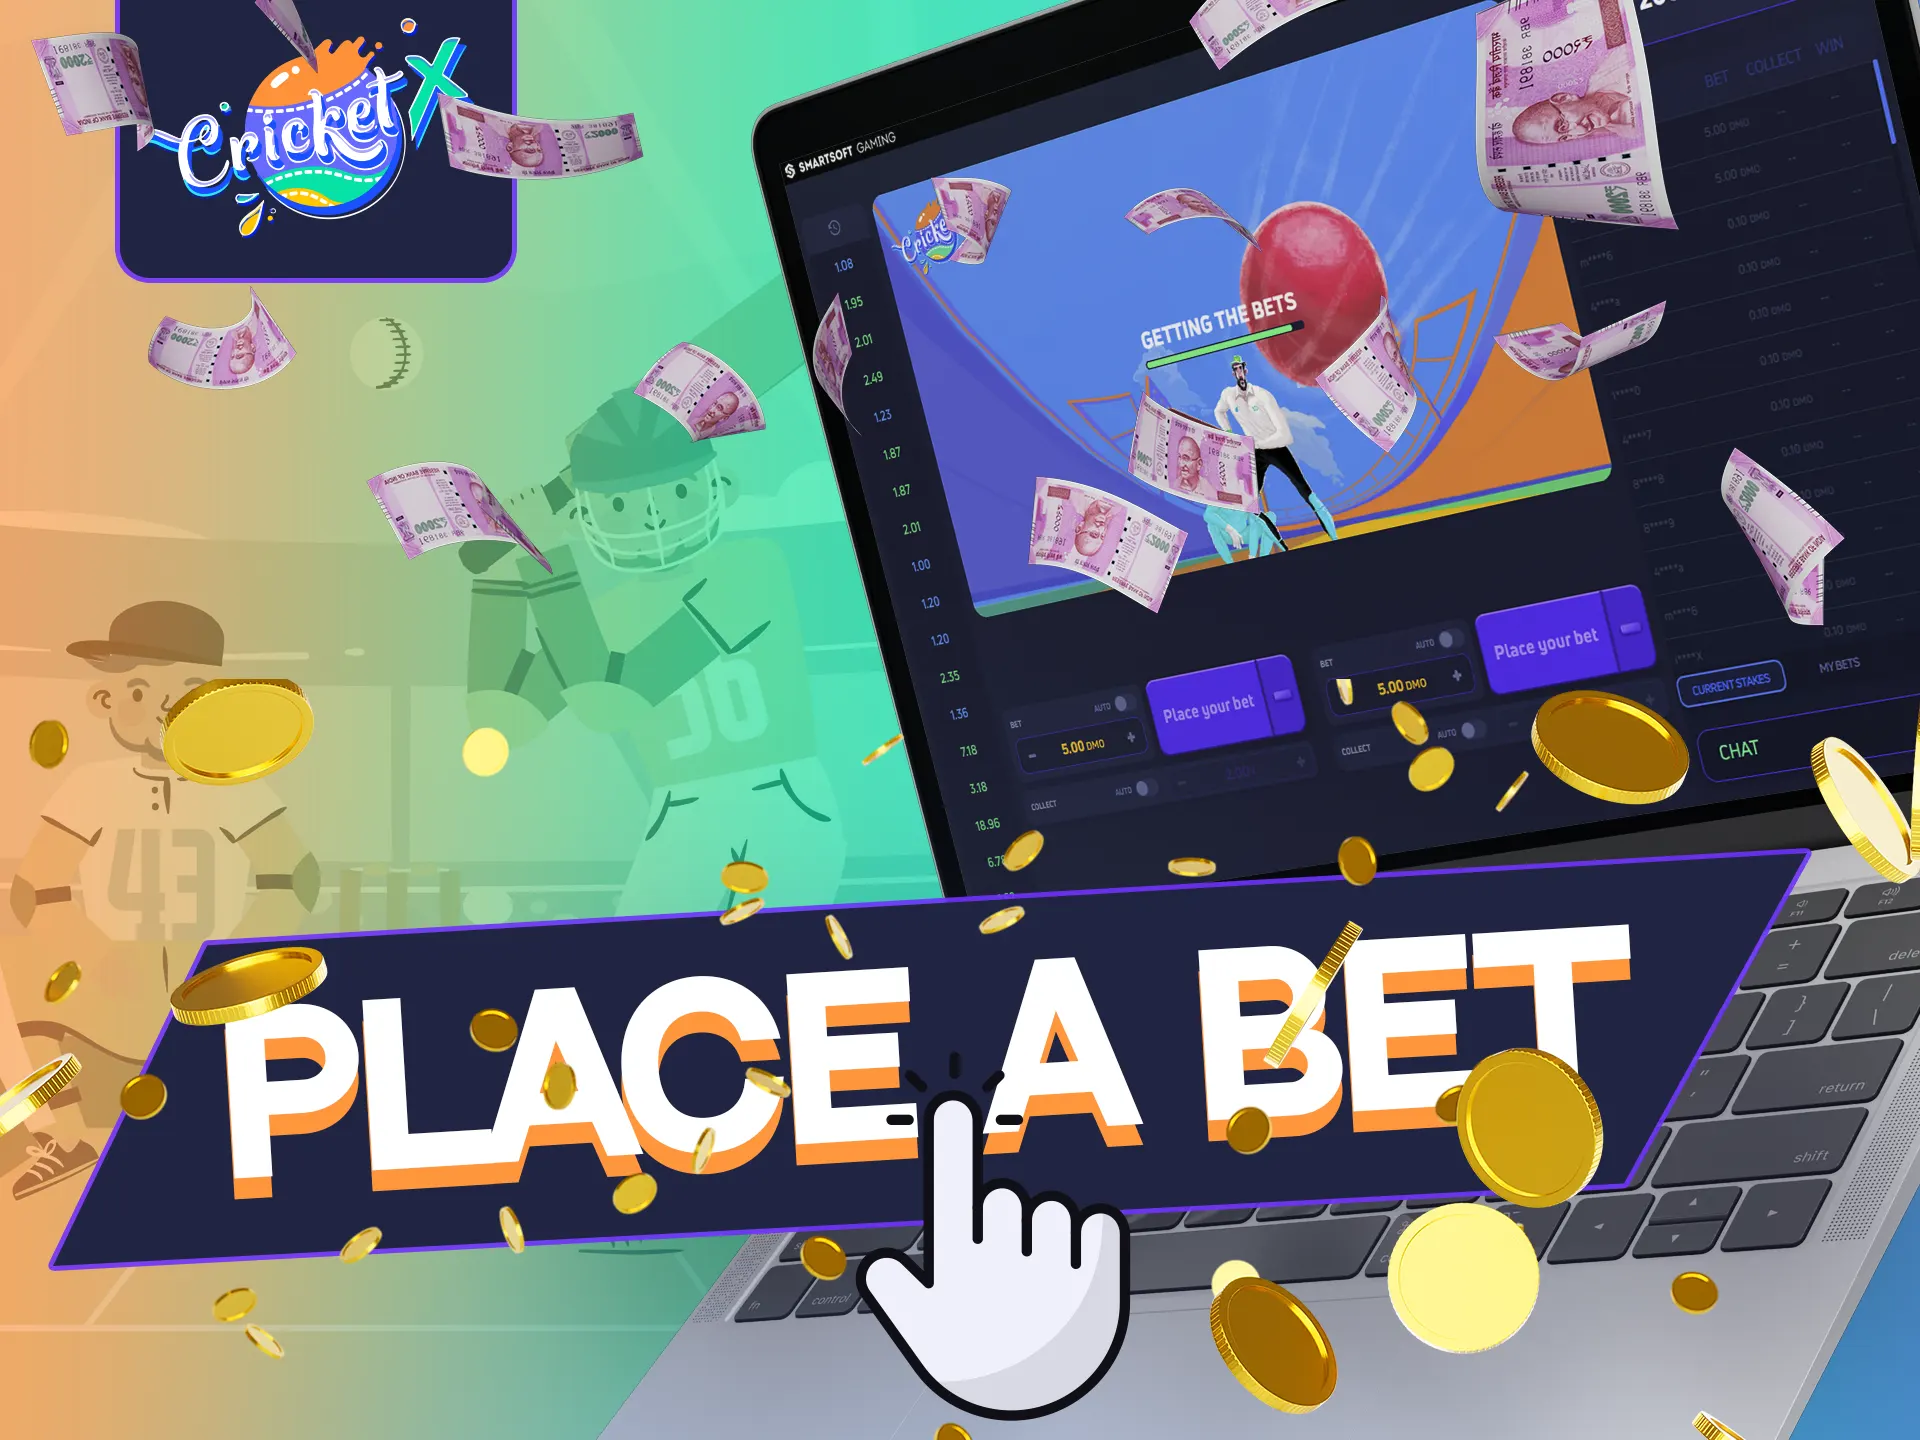 Learn how to make bets in the Cricket-X game.